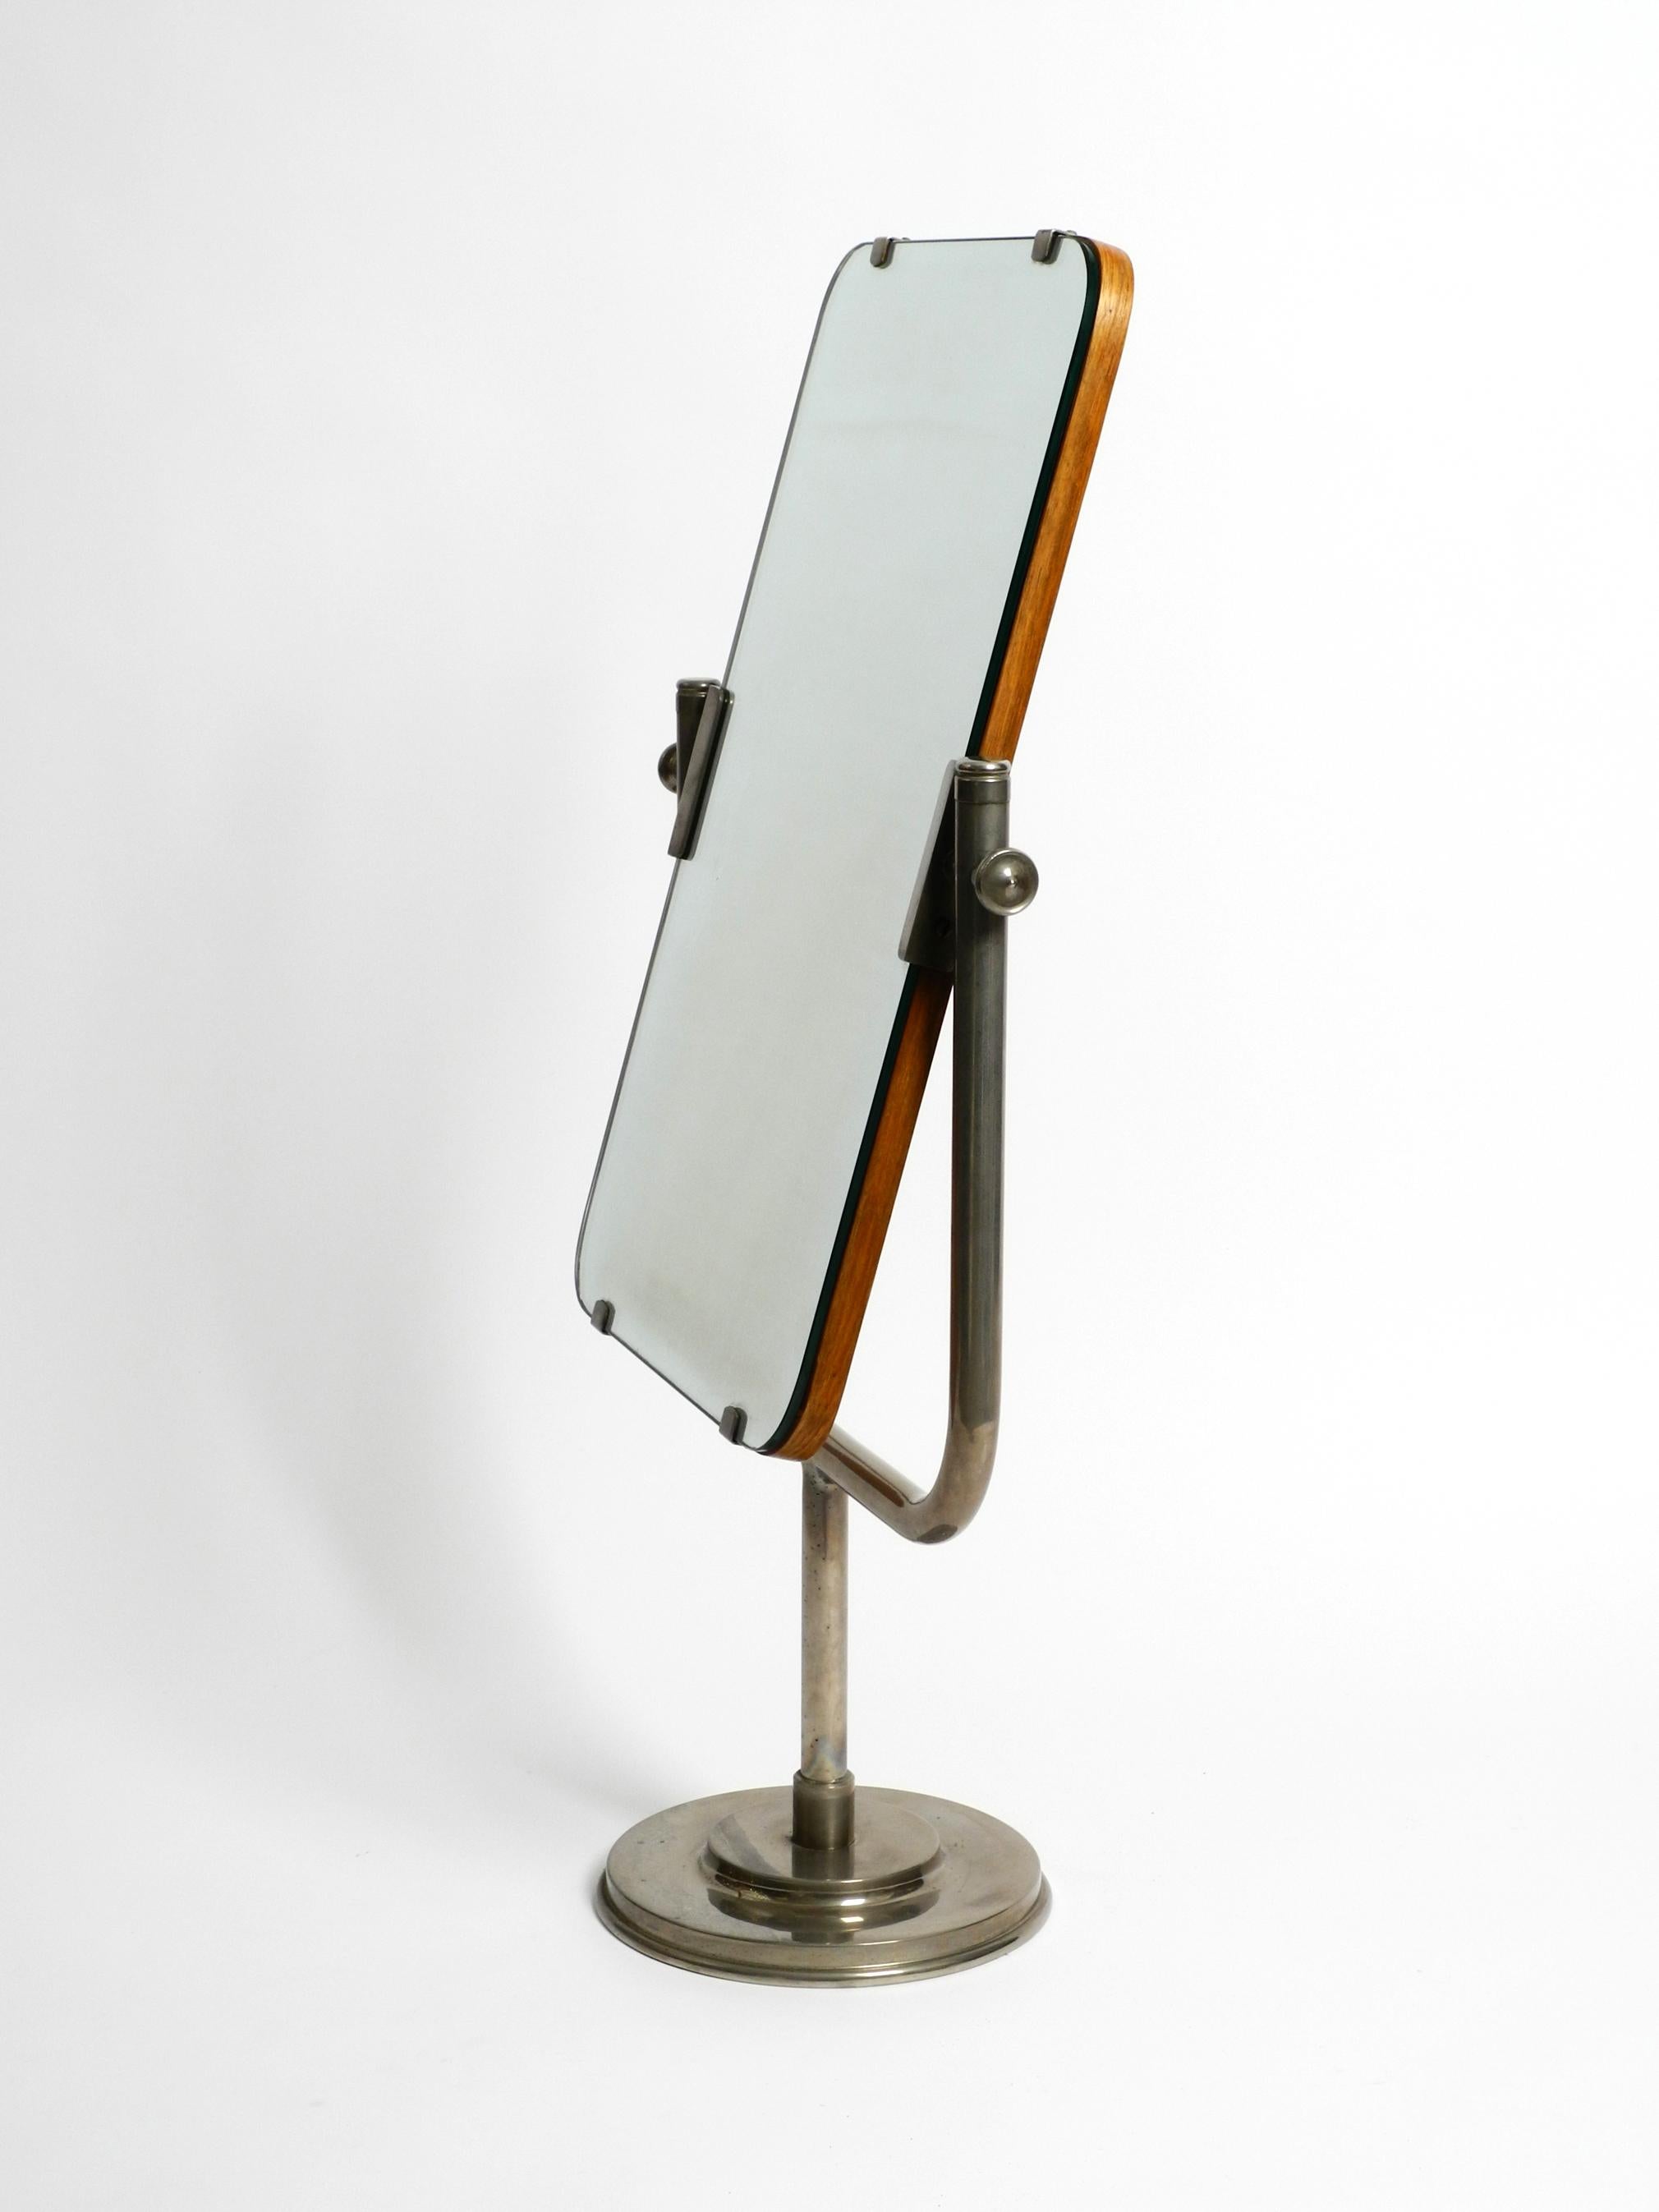 German Huge 30s Table Mirror with Nickel-Plated Metal Frame and Original Mirror Glass